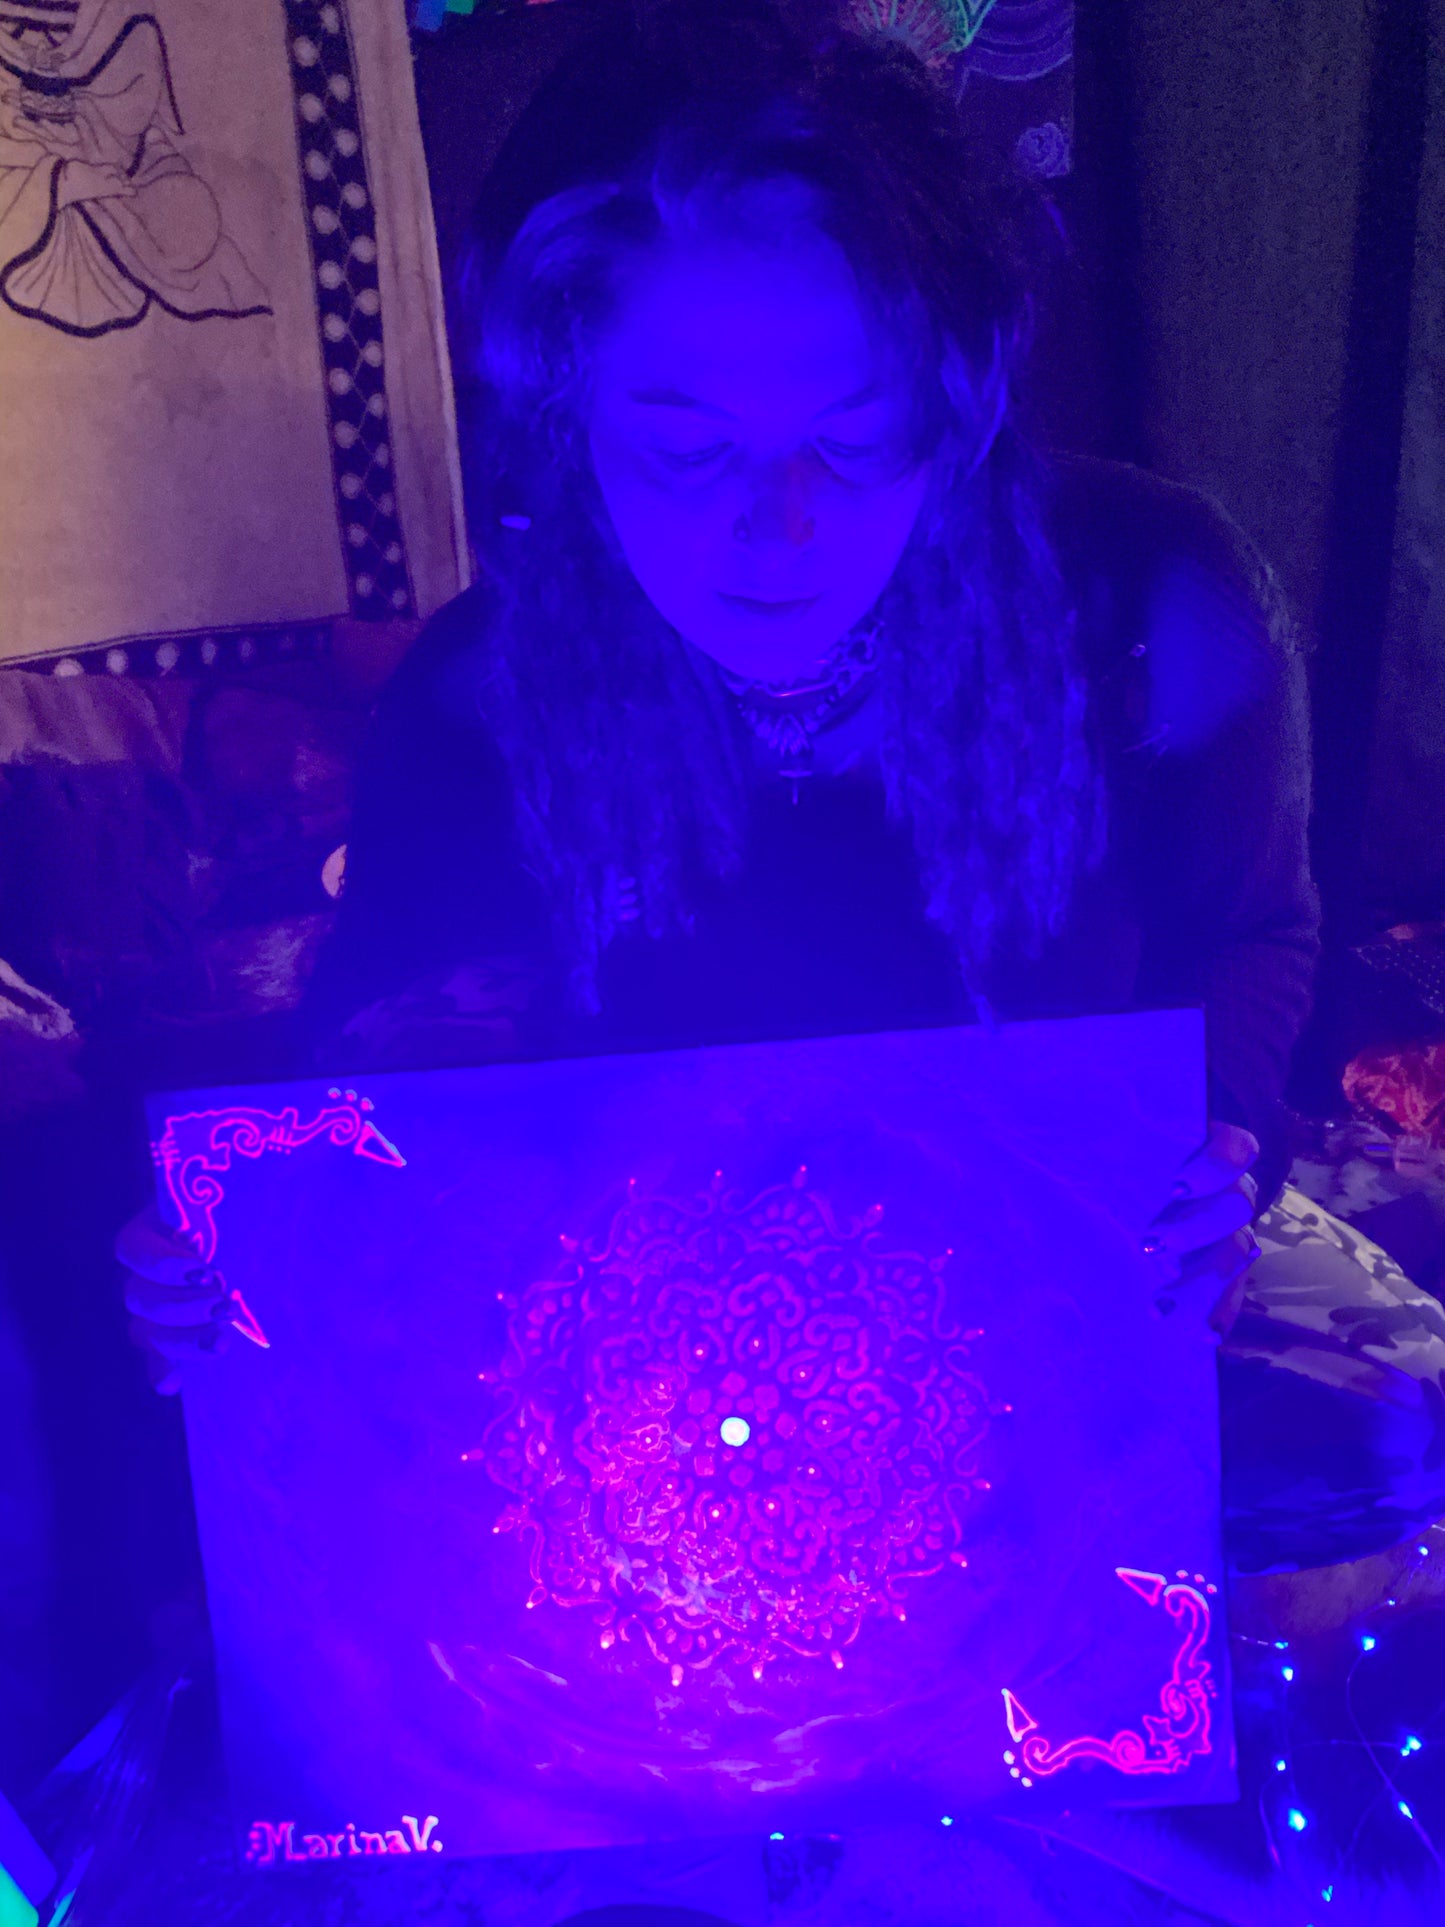 UV Painting: “Knowing in UV”